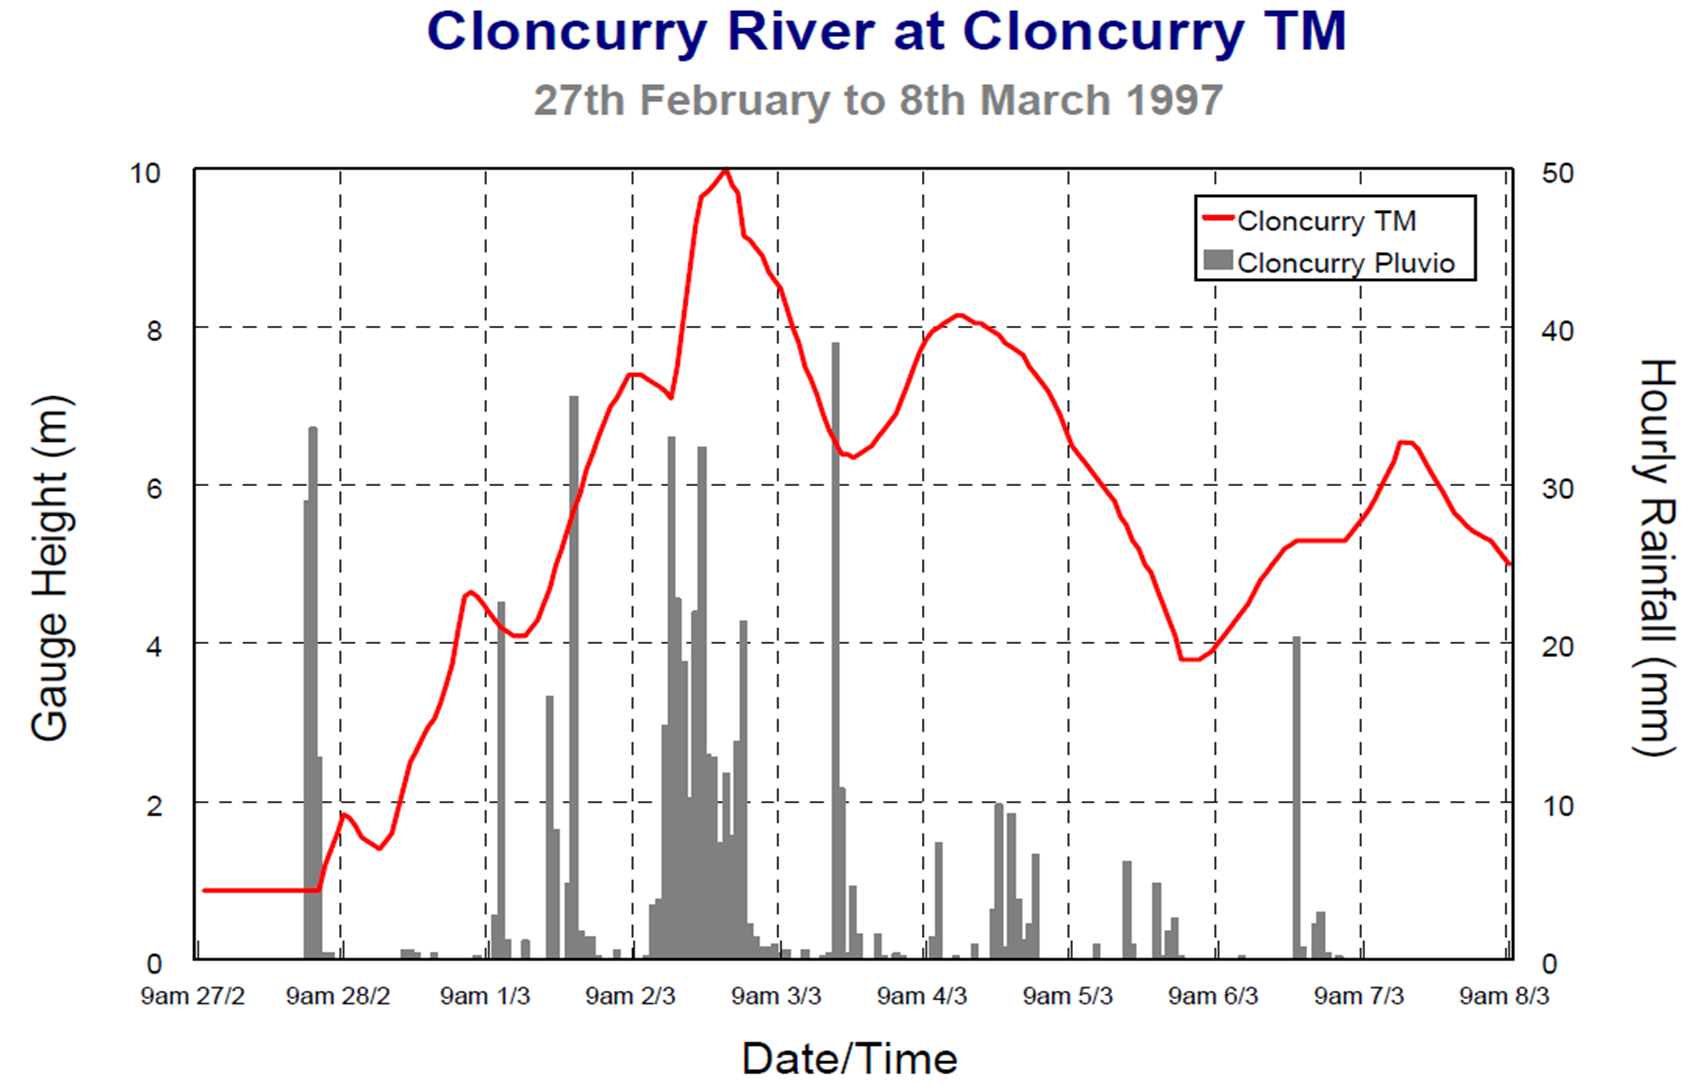 Hourly rainfall data is available from the pluviograph at Cloncurry Airport